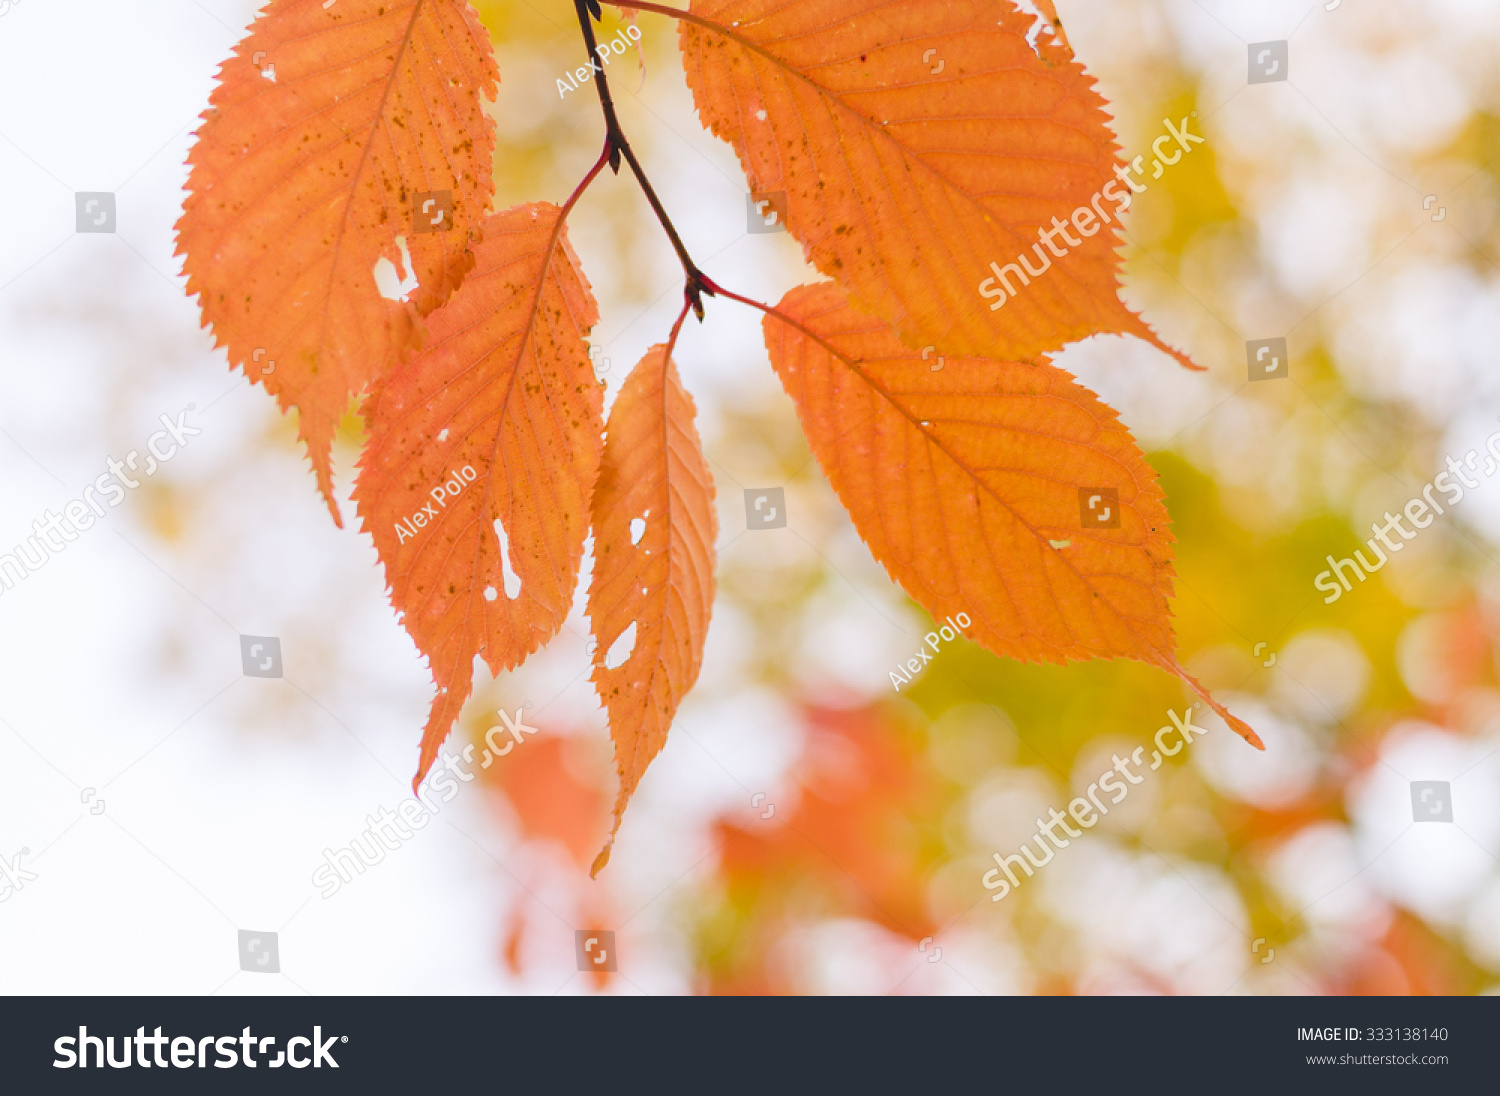 Tree branch with orange autumn leaves background, shallow depth #333138140